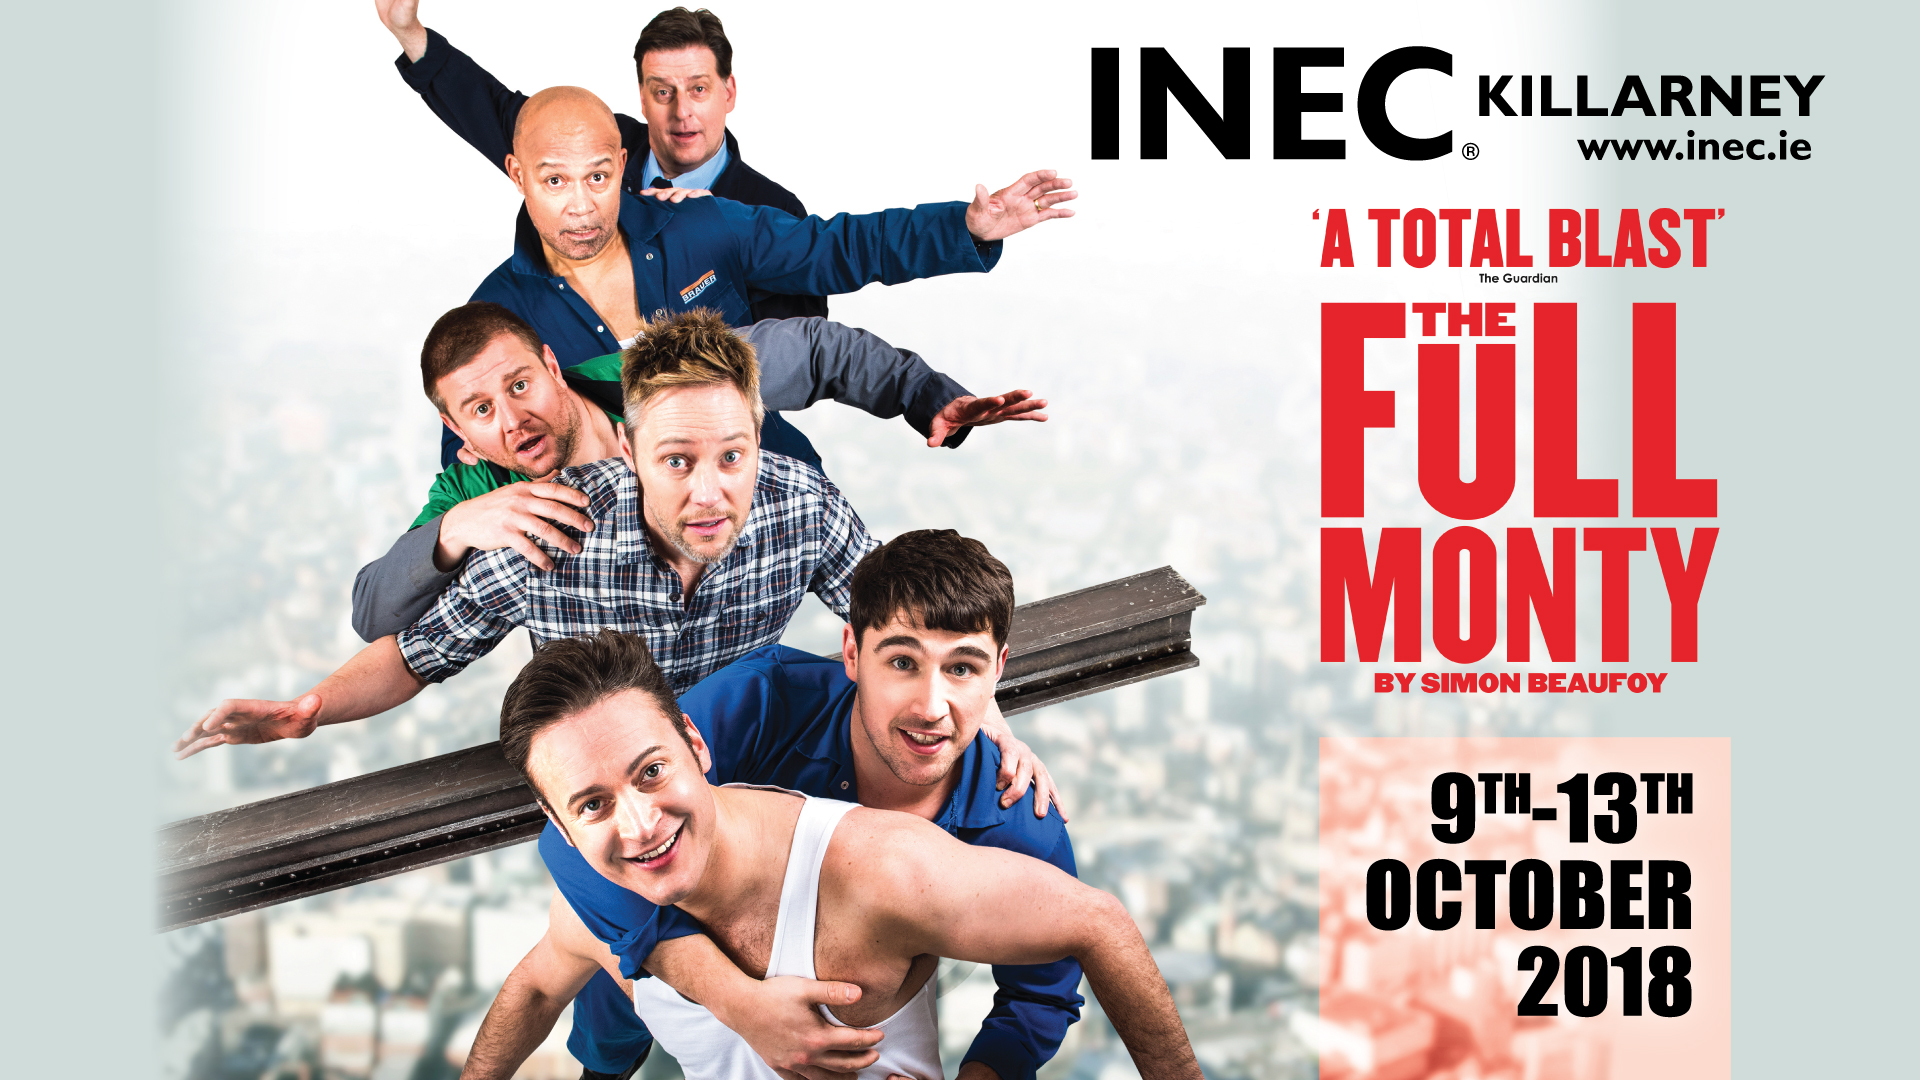 The Full Monty comes to INEC October 9-13